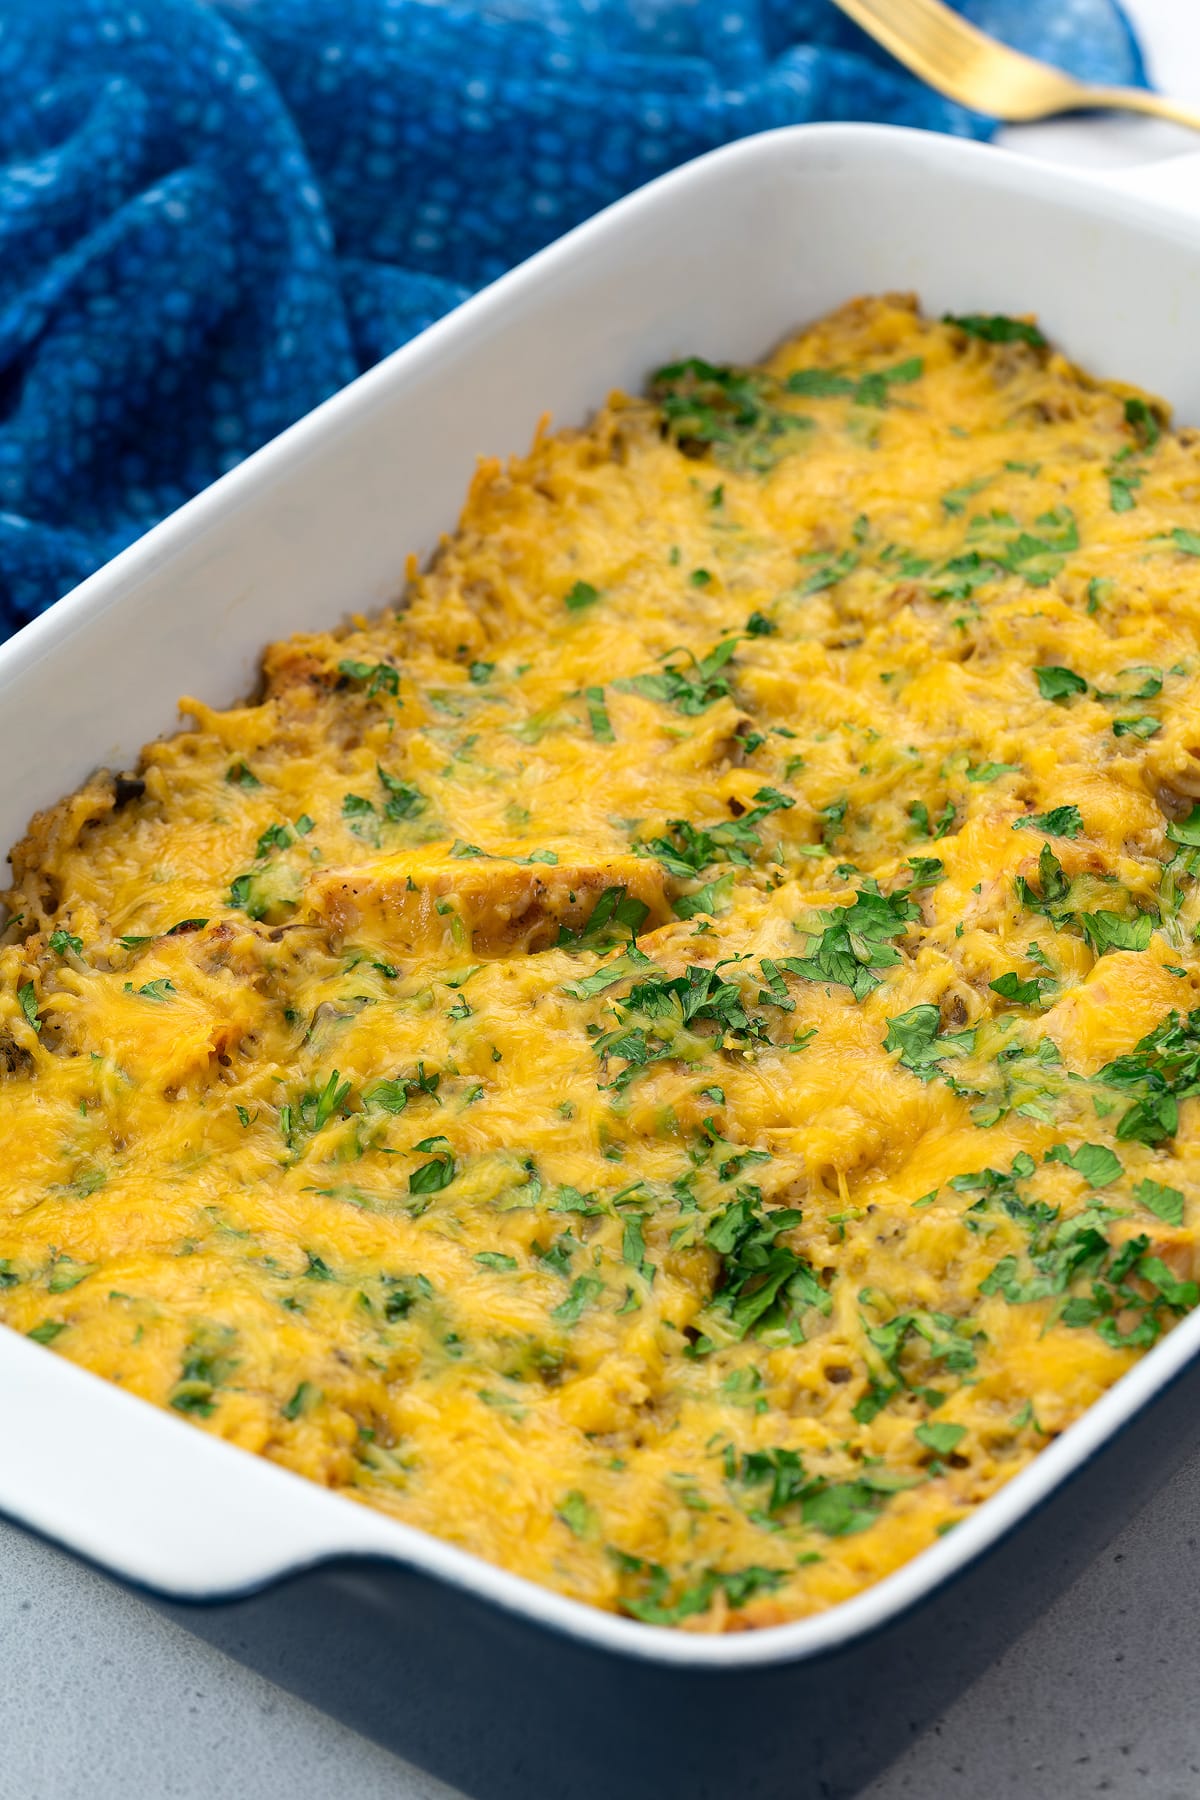 Chicken and rice casserole in a baking dish with a golden fork and blue towel placed around.